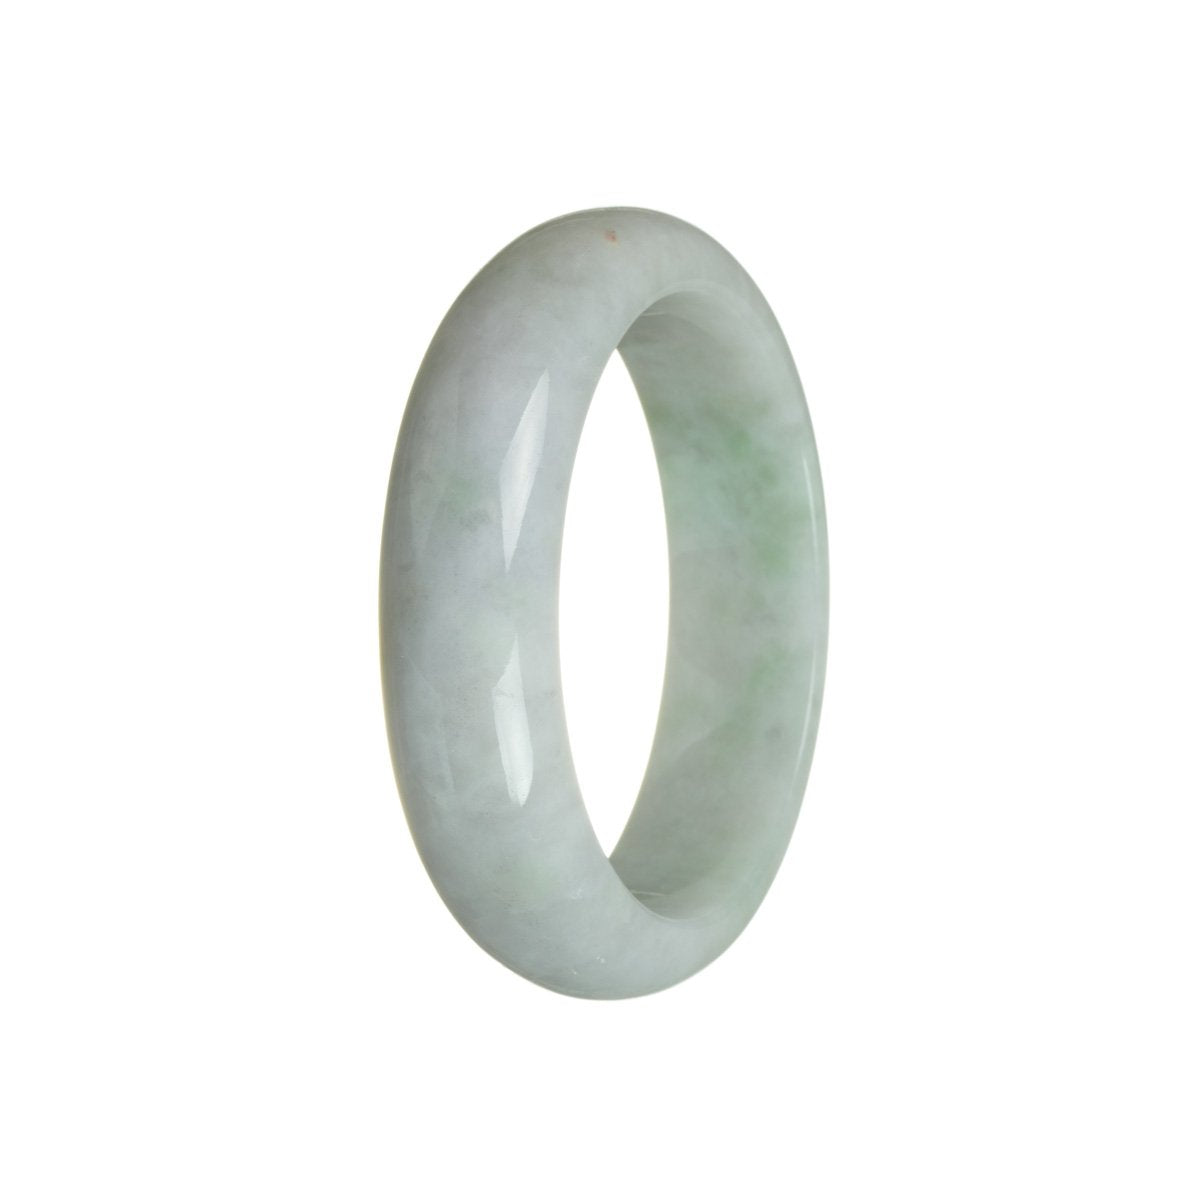 A lavender jadeite bangle with a half moon design, measuring 58mm in size.